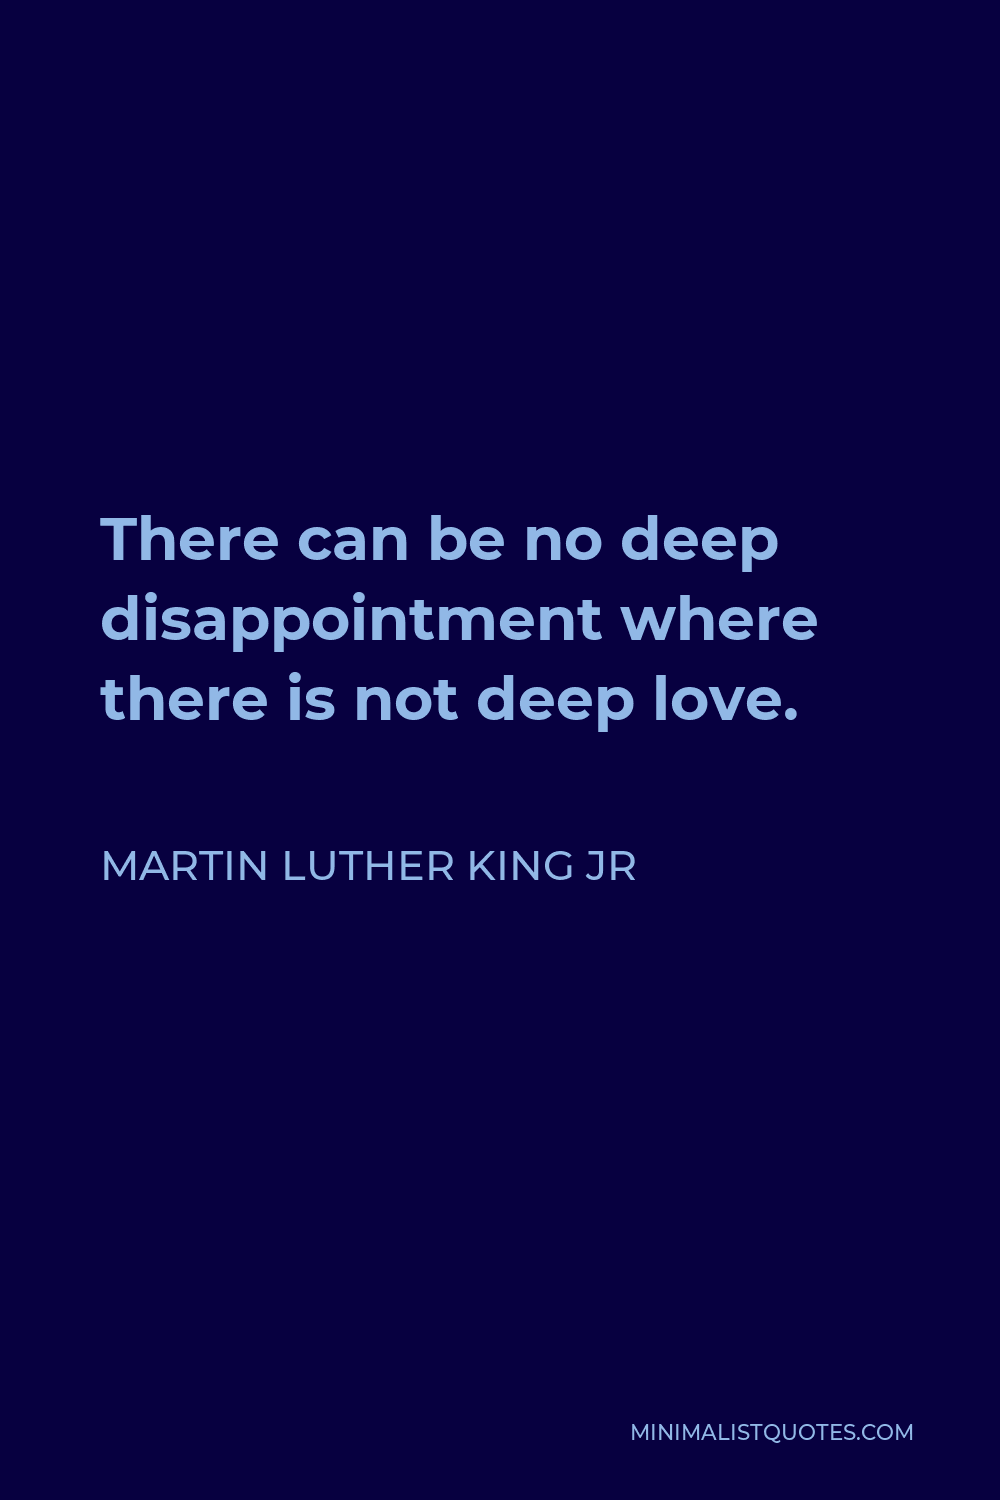 Martin Luther King Jr Quote - There can be no deep disappointment where there is not deep love.